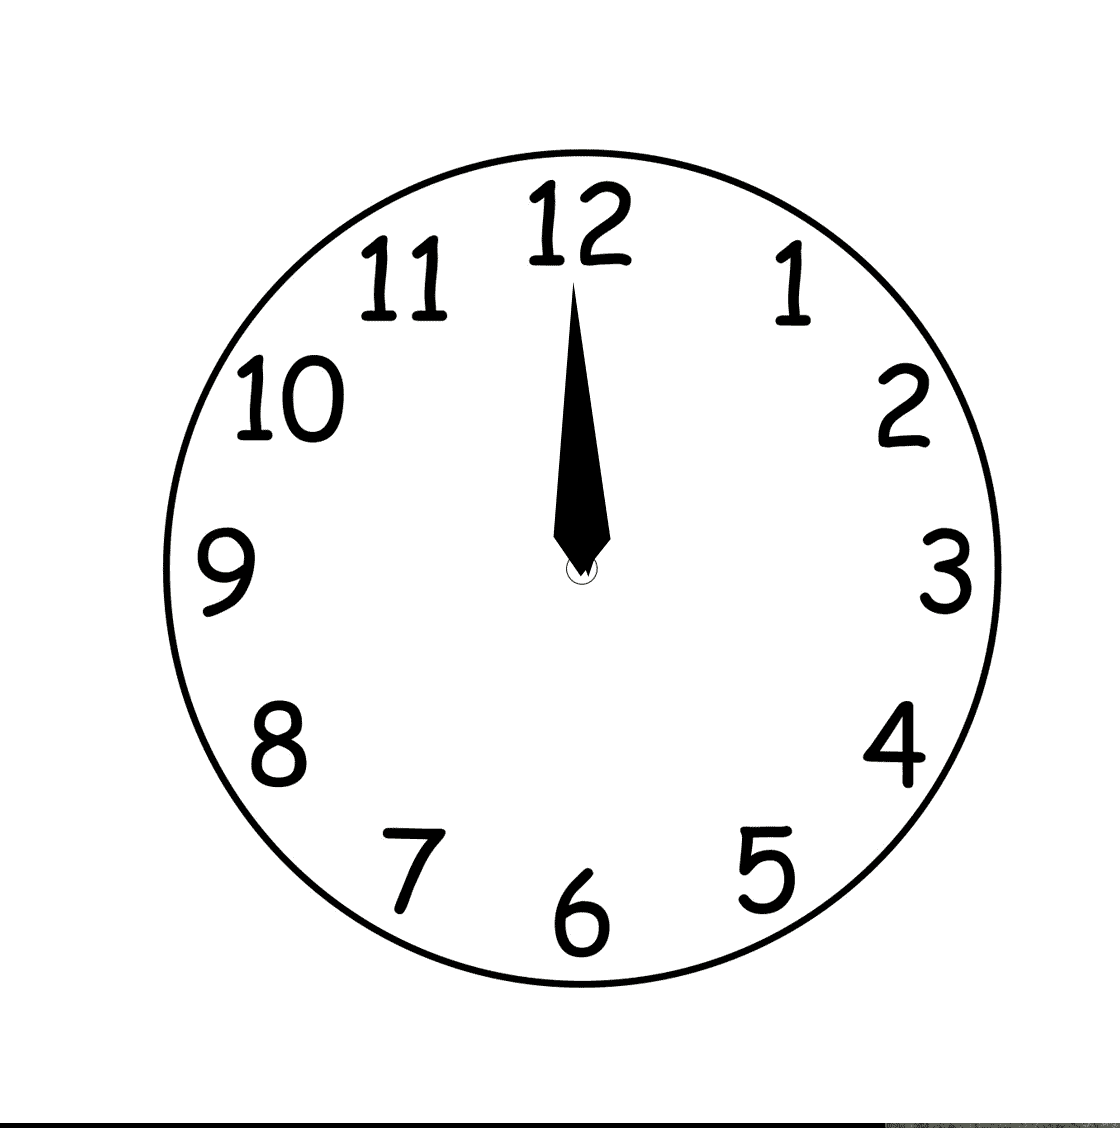 Free Clock Gif Png, Download Free Clock Gif Png png images, Free ...